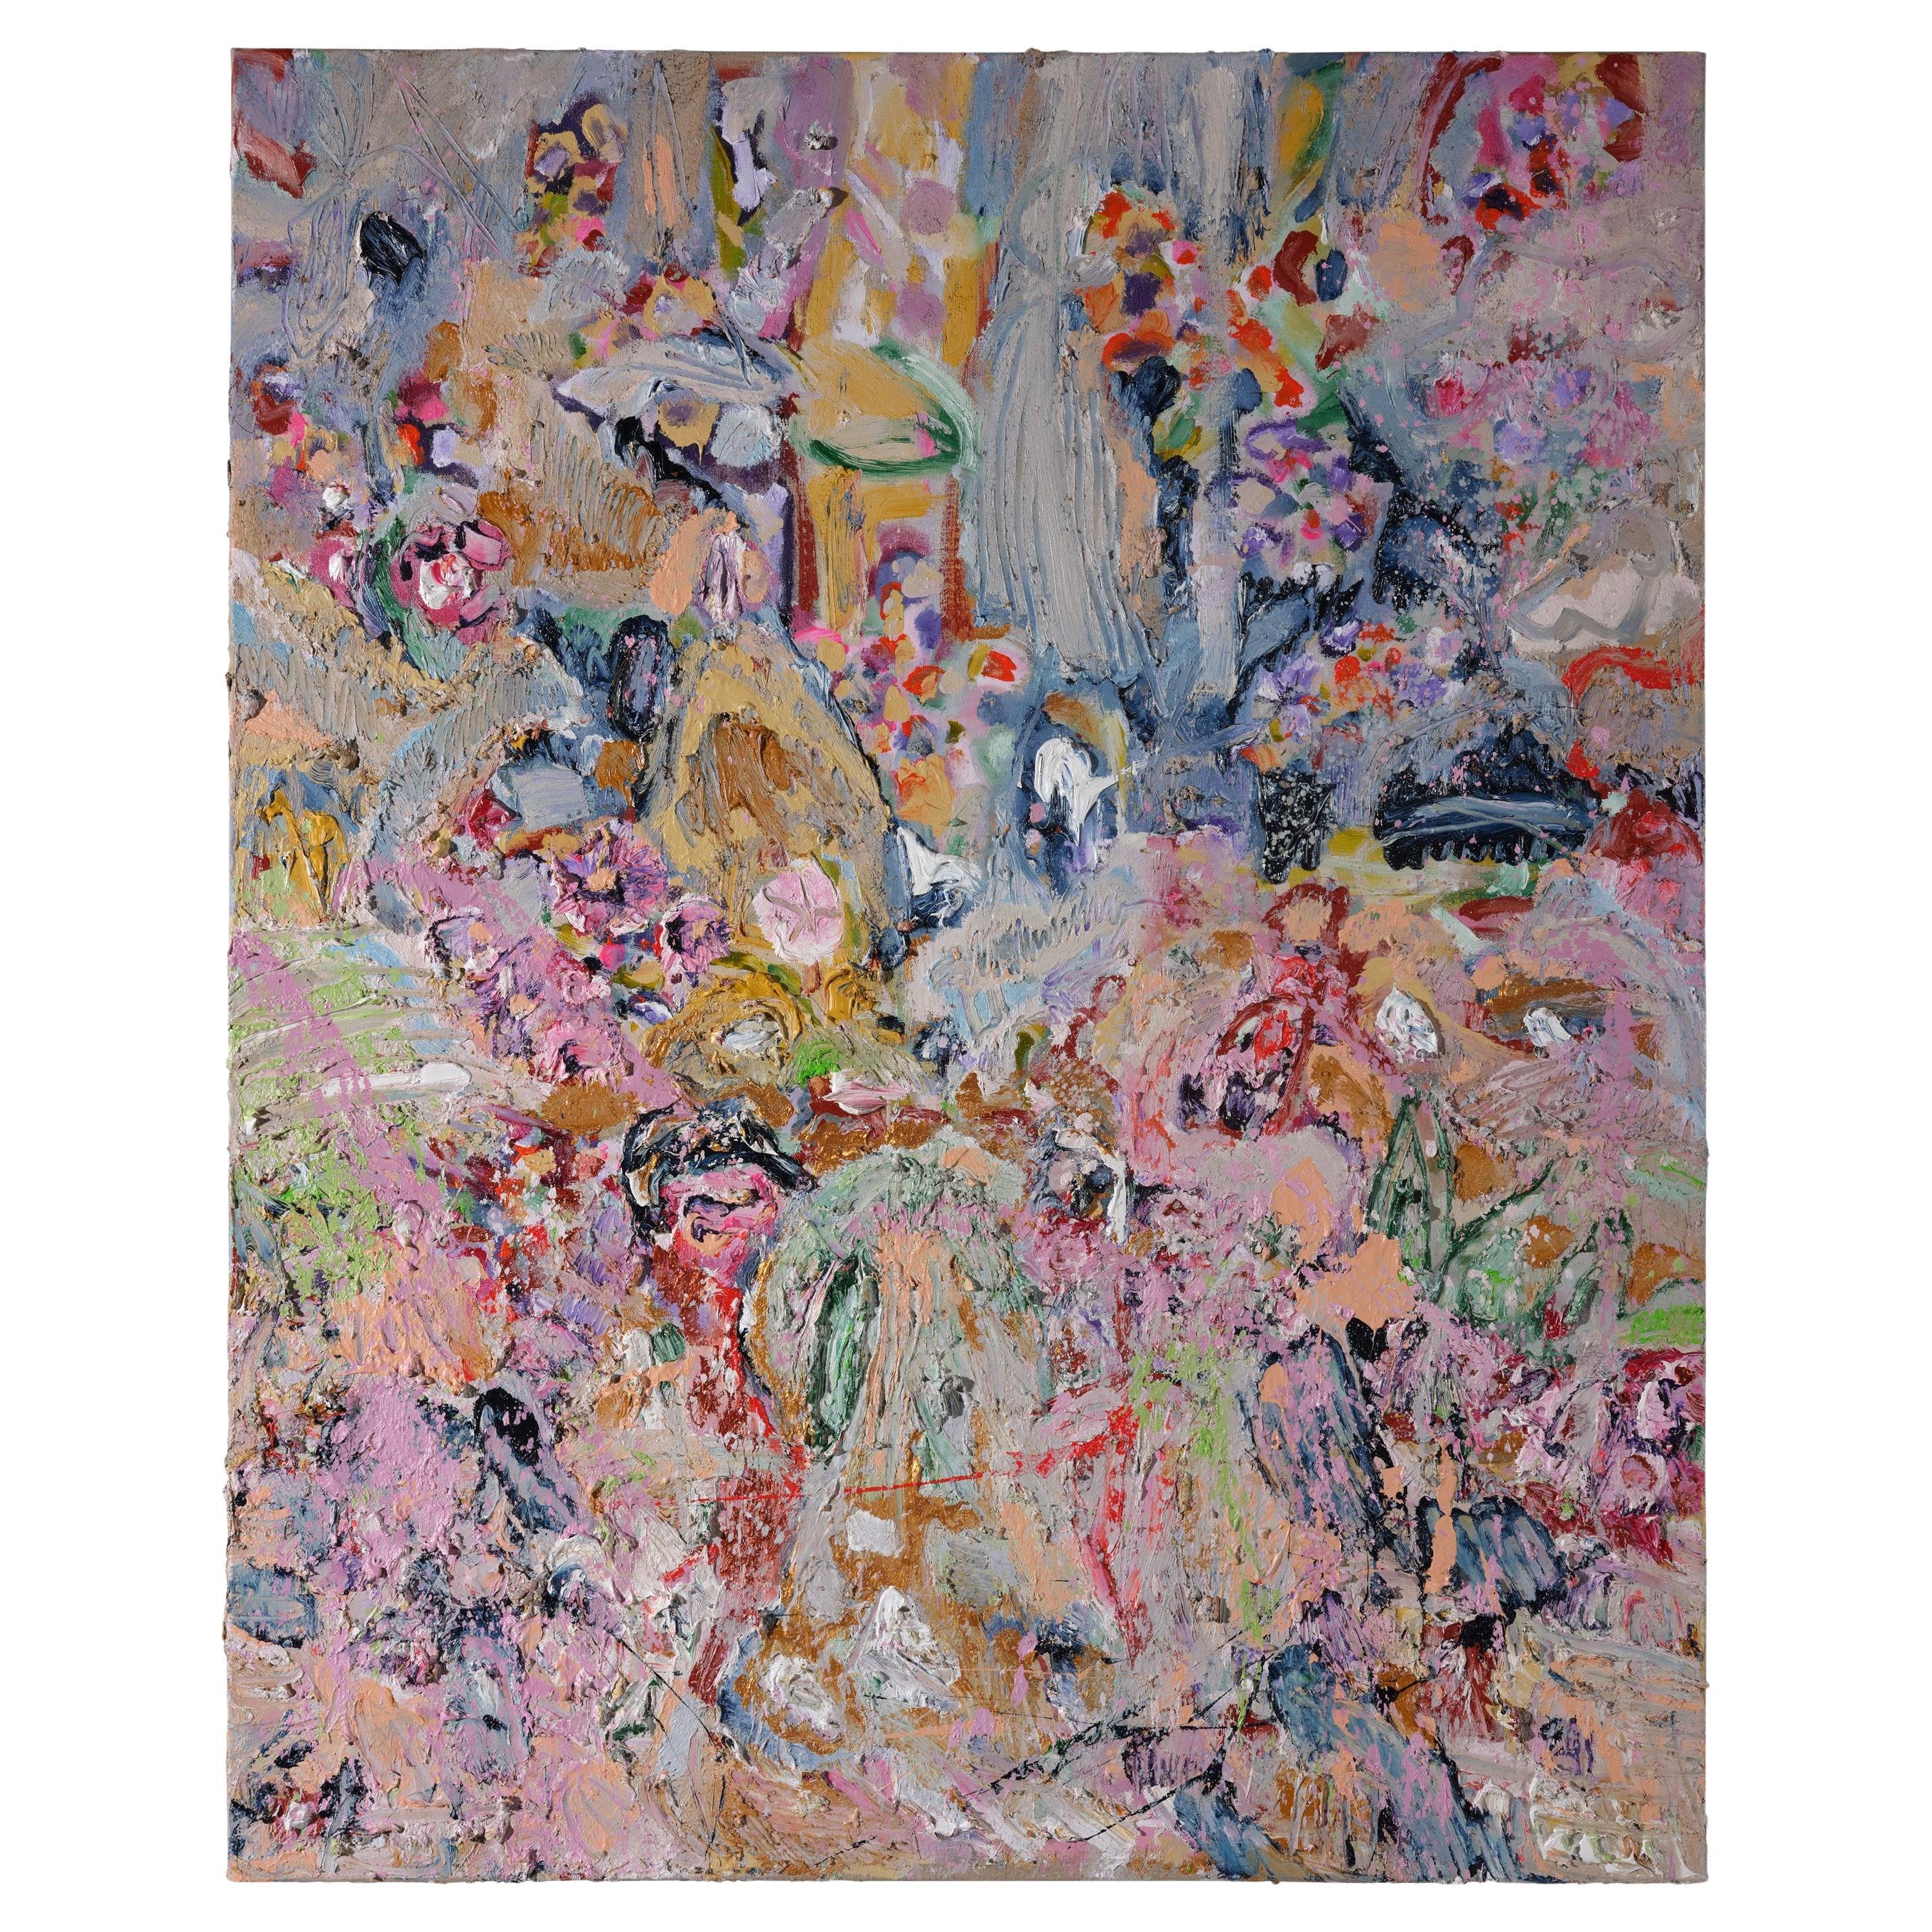 Les Champs Fleurissent, Abstract Mixed Colour Oil Painting by Maarten Vrolijk